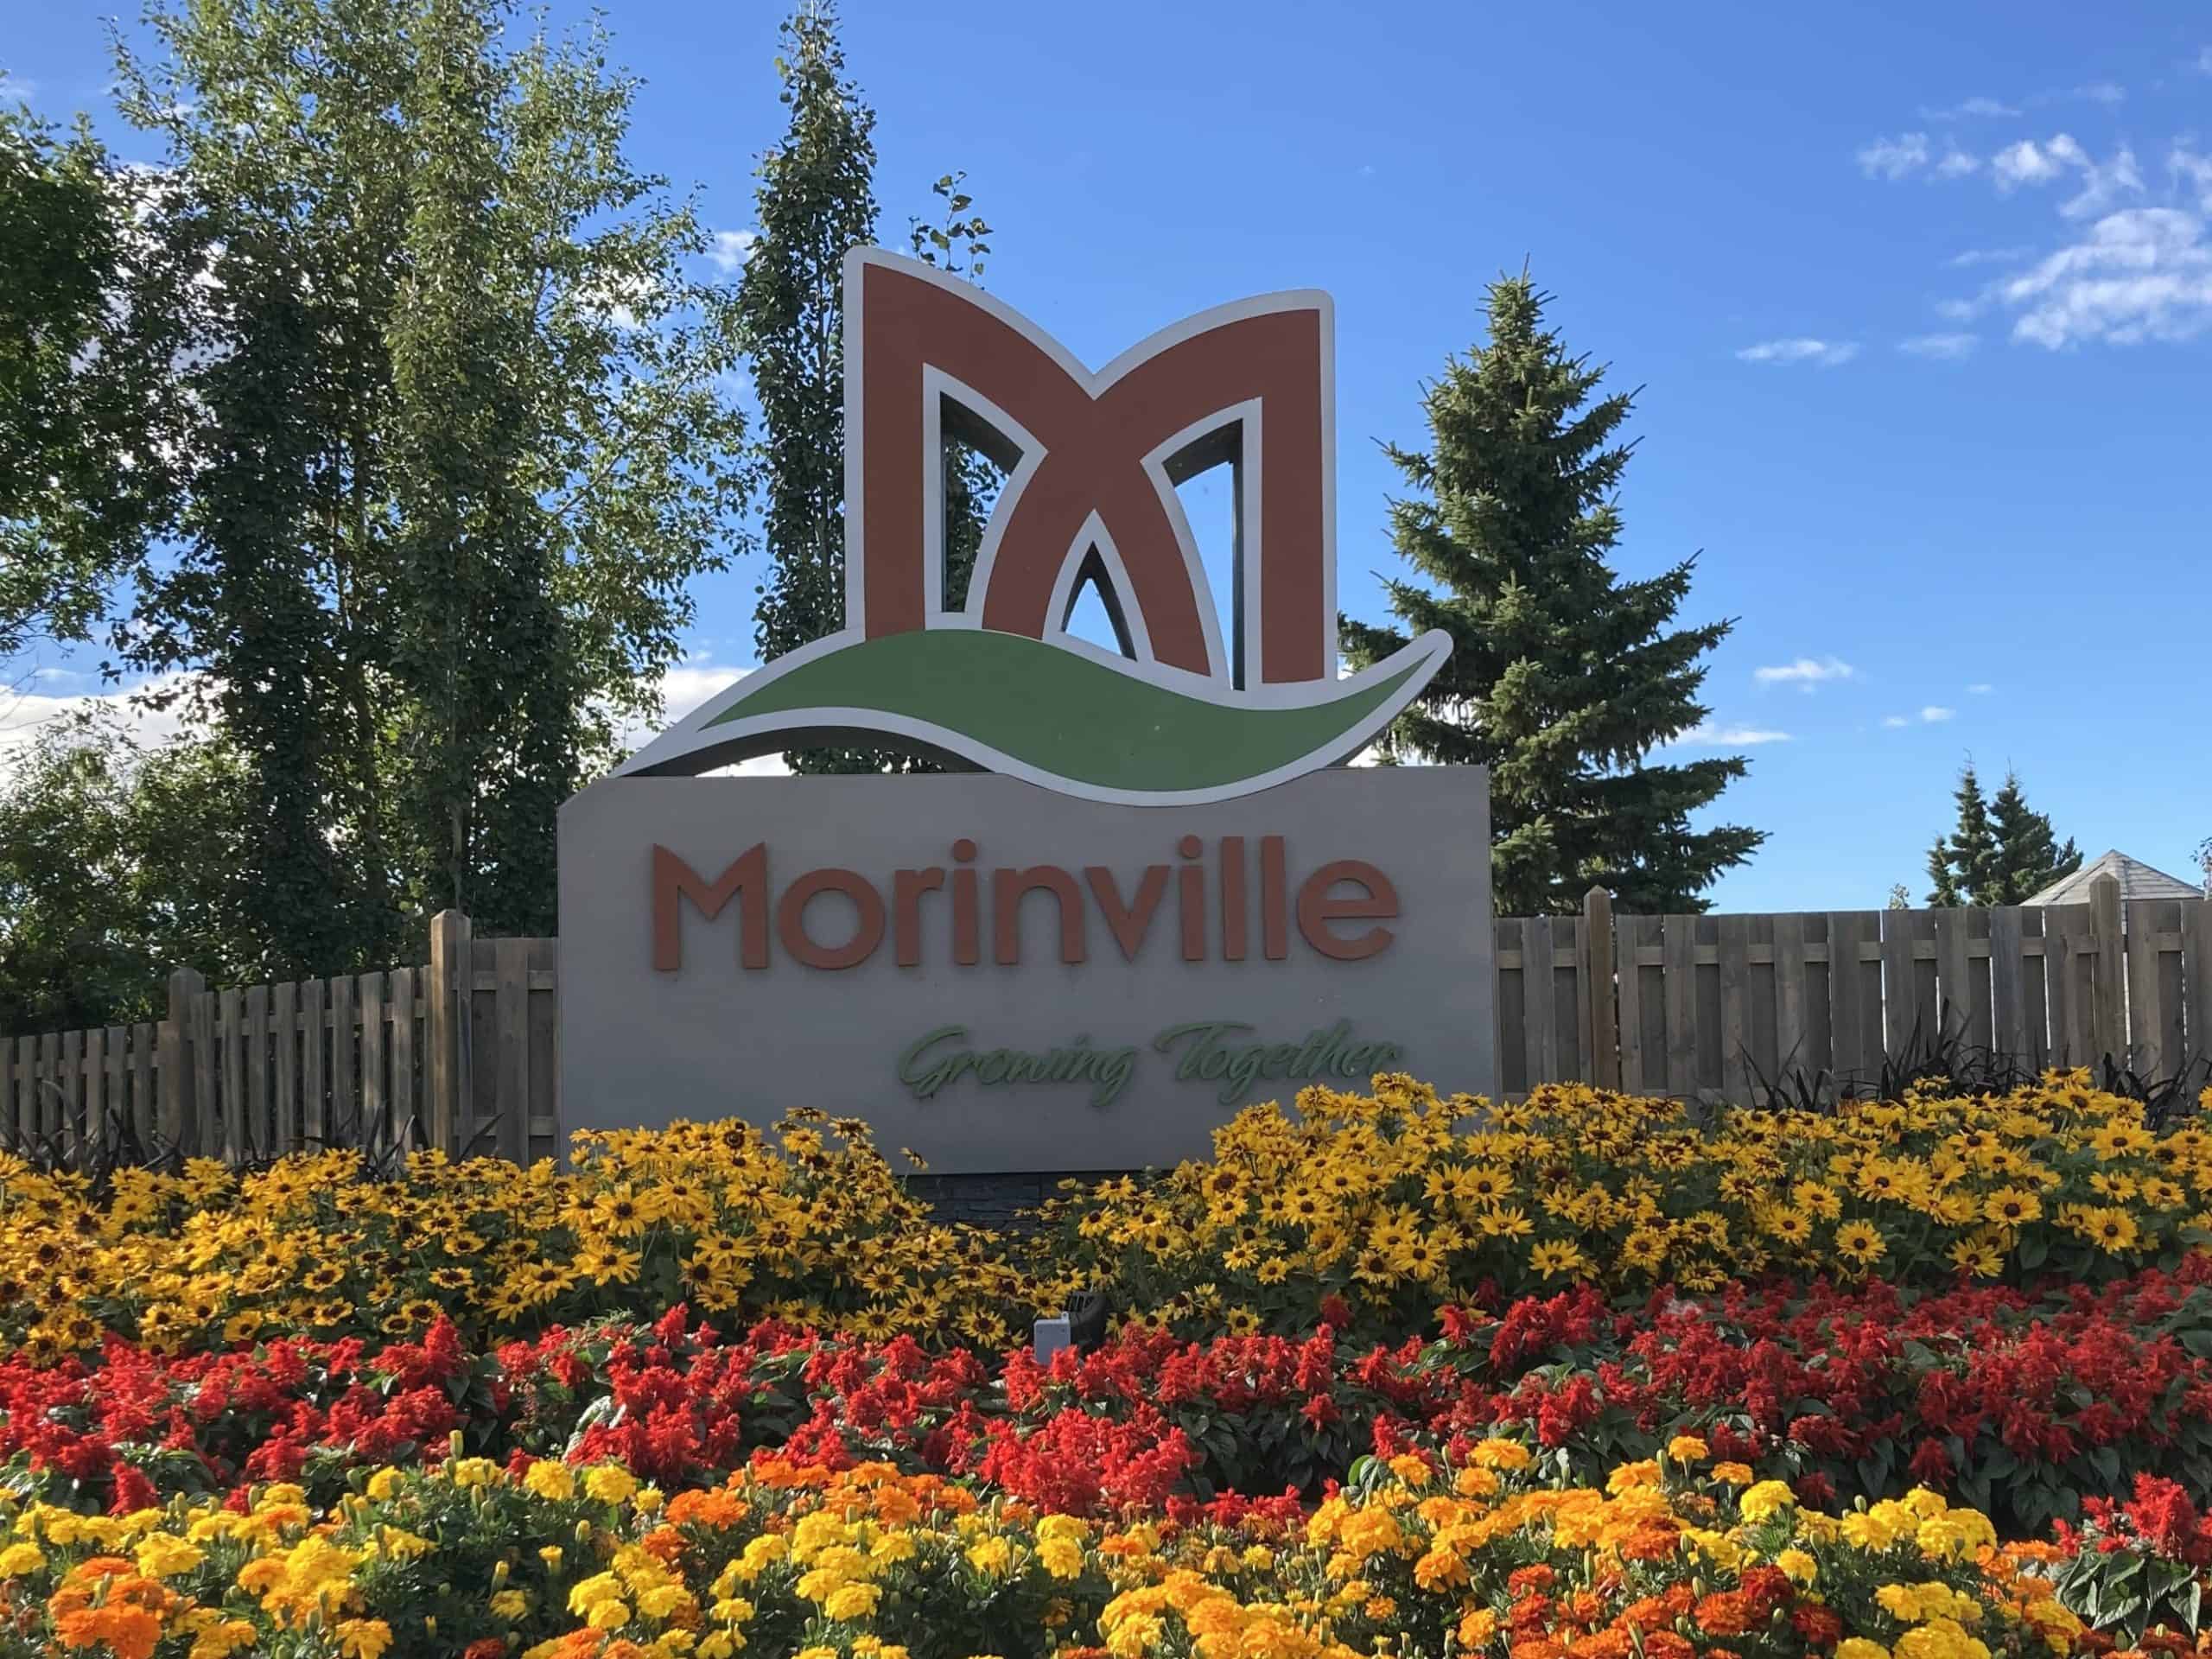 Town of Morinville sign.